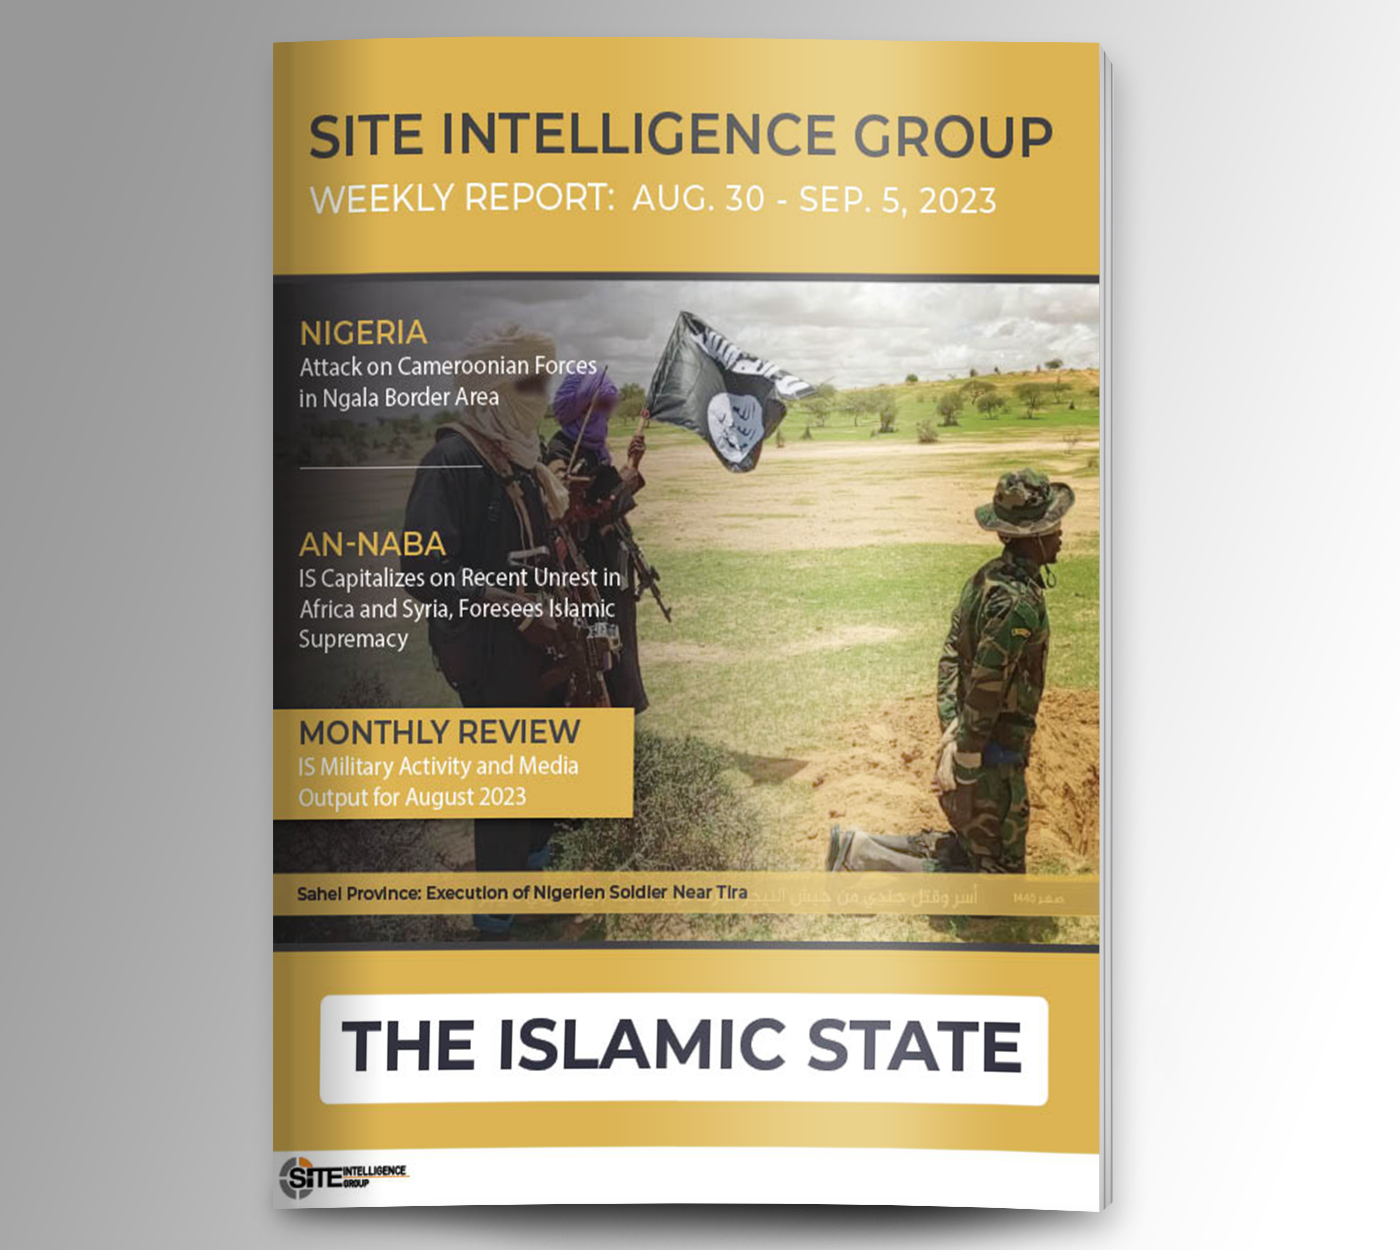 Weekly inSITE on the Islamic State for August 30-September 5, 2023